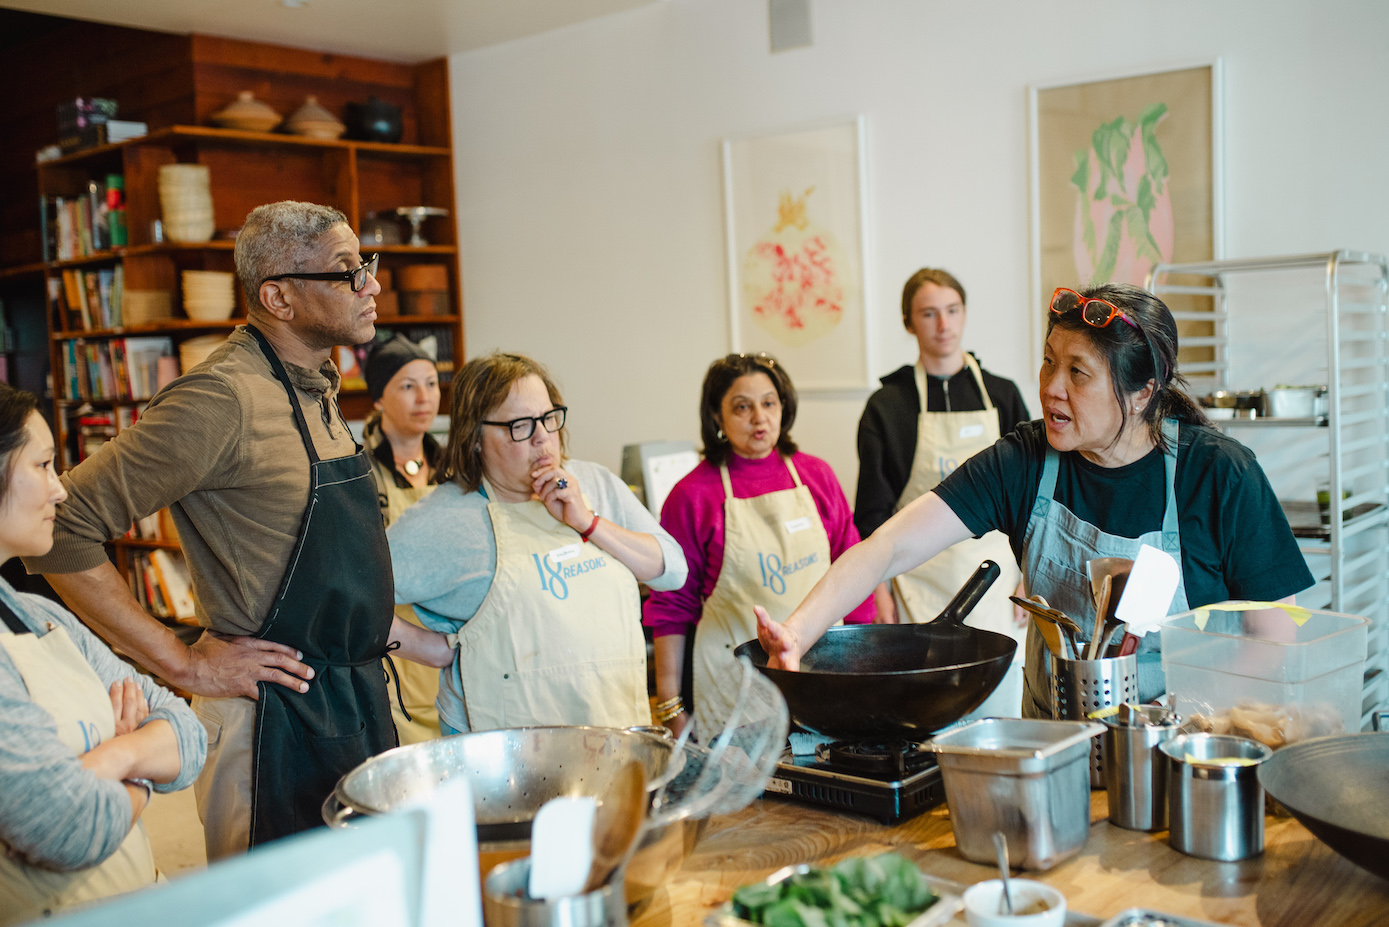 A class gathers around the instructor at the 18th Street Kitchen